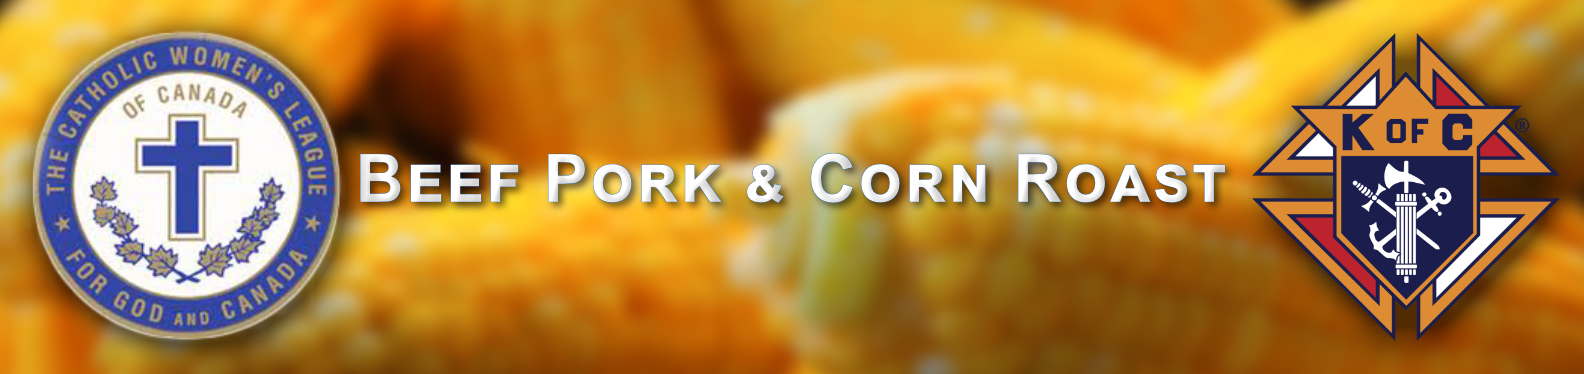 Corn Cobs with CWL and Knights of Columbus logos